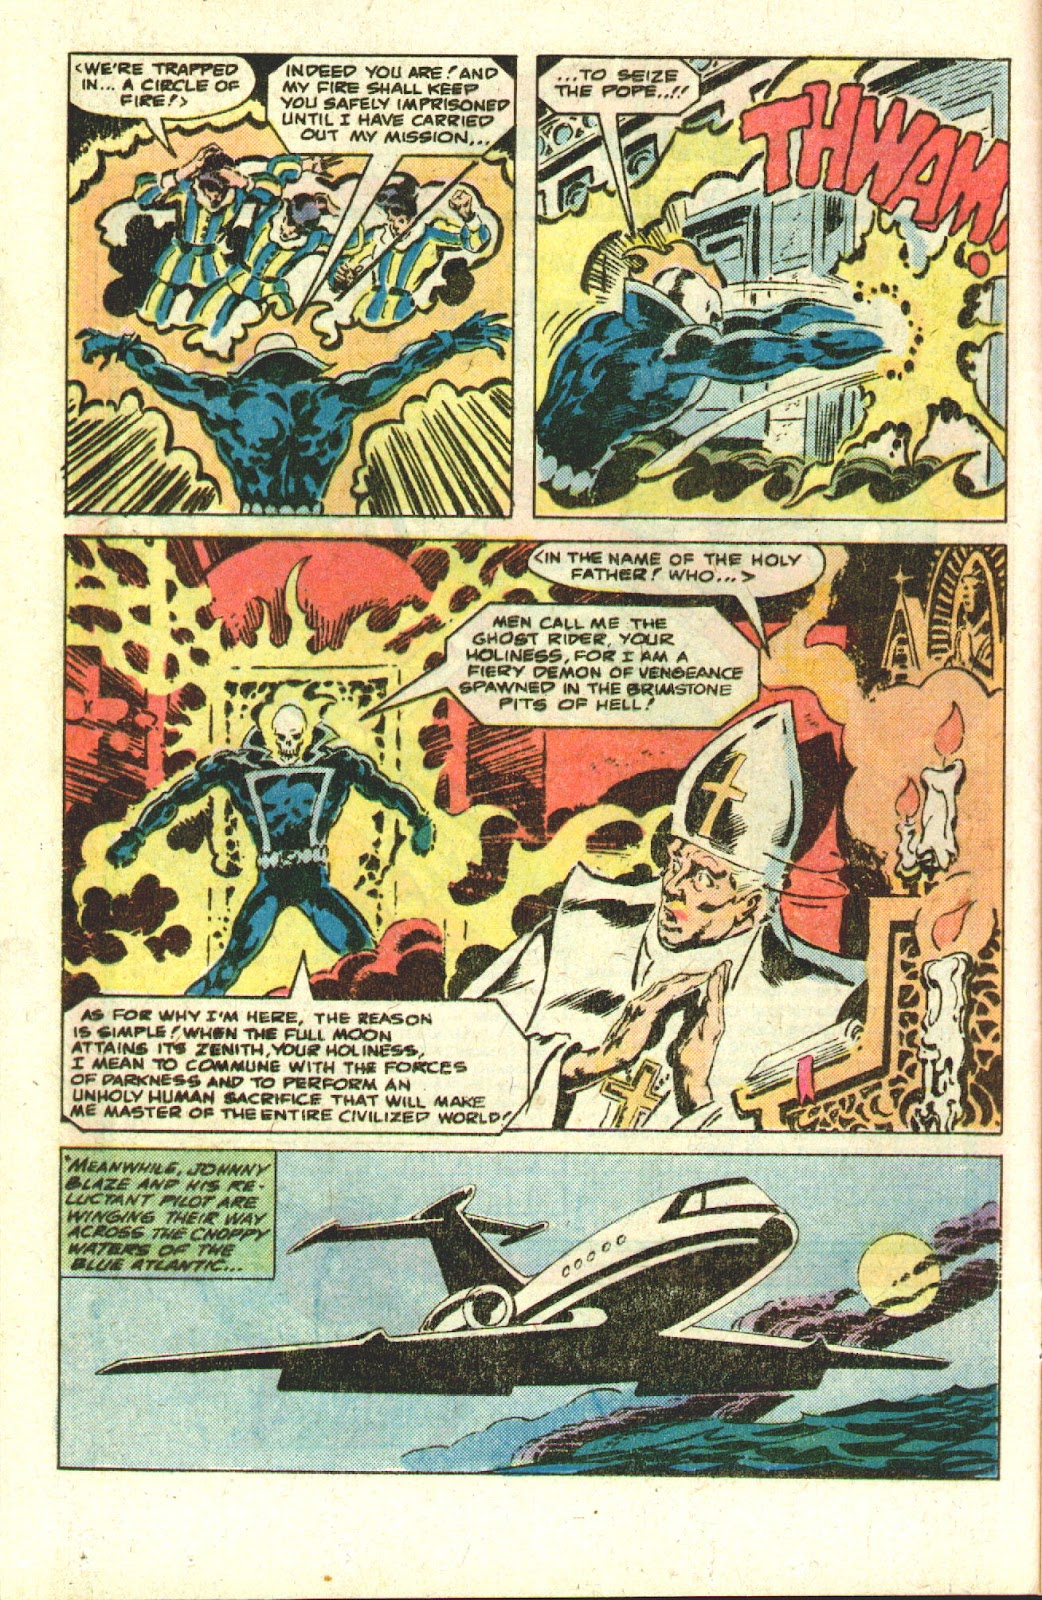 What If? (1977) issue 28 - Daredevil became an agent of SHIELD - Page 16